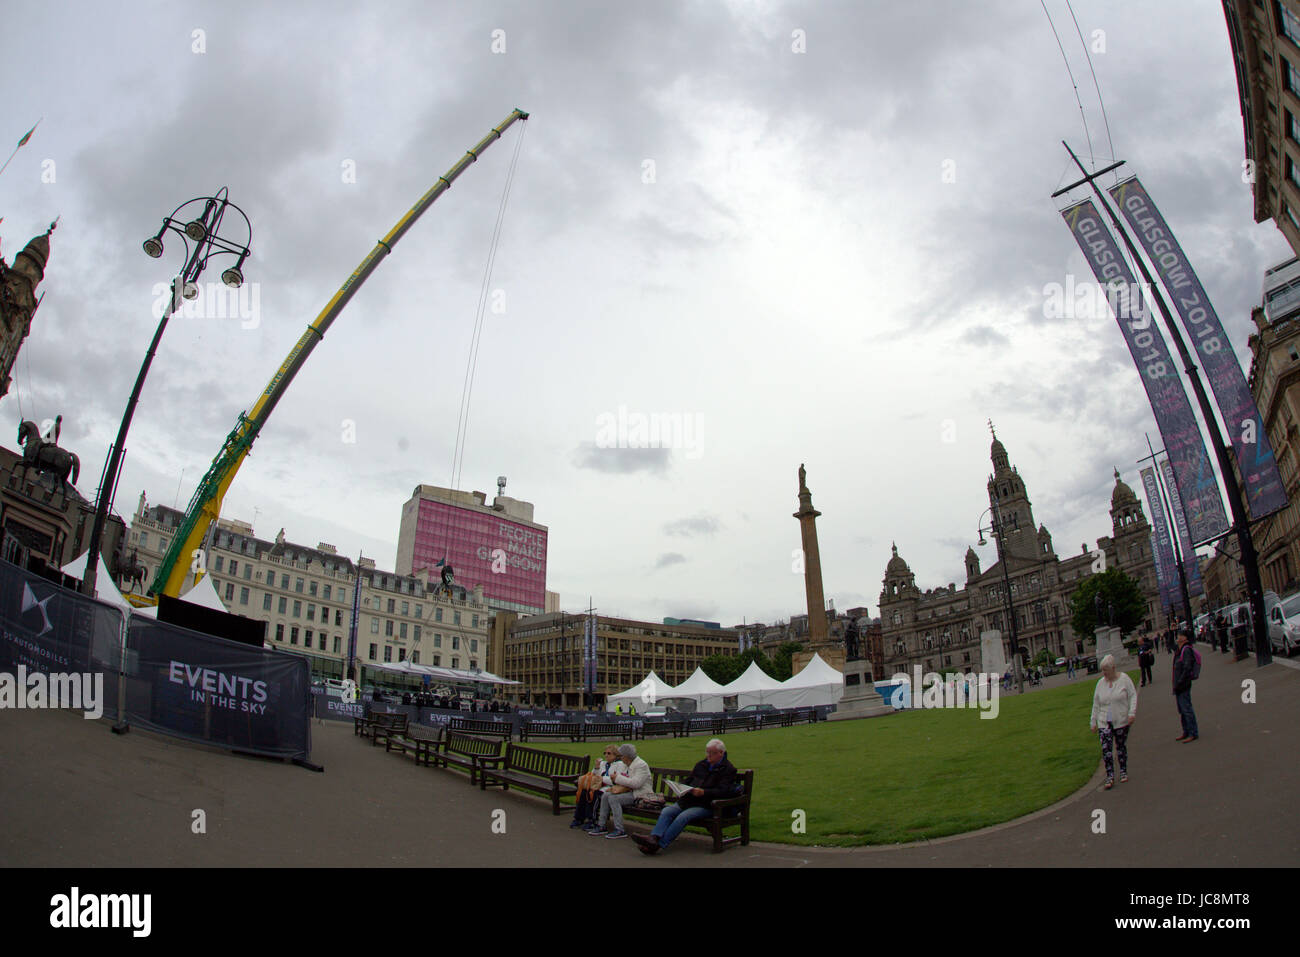 Glasgow, Scotland, UK. 14th June, 2017. The 'flying restaurant' was set up today in George Square by  the  Events in the Sky company. Glaswegians will be able to eat pie in the sky, as the city’s  top restaurants are serving meals  to patrons suspended high above the city for the next week .Credit Gerard Ferry/Alamy Live News Stock Photo